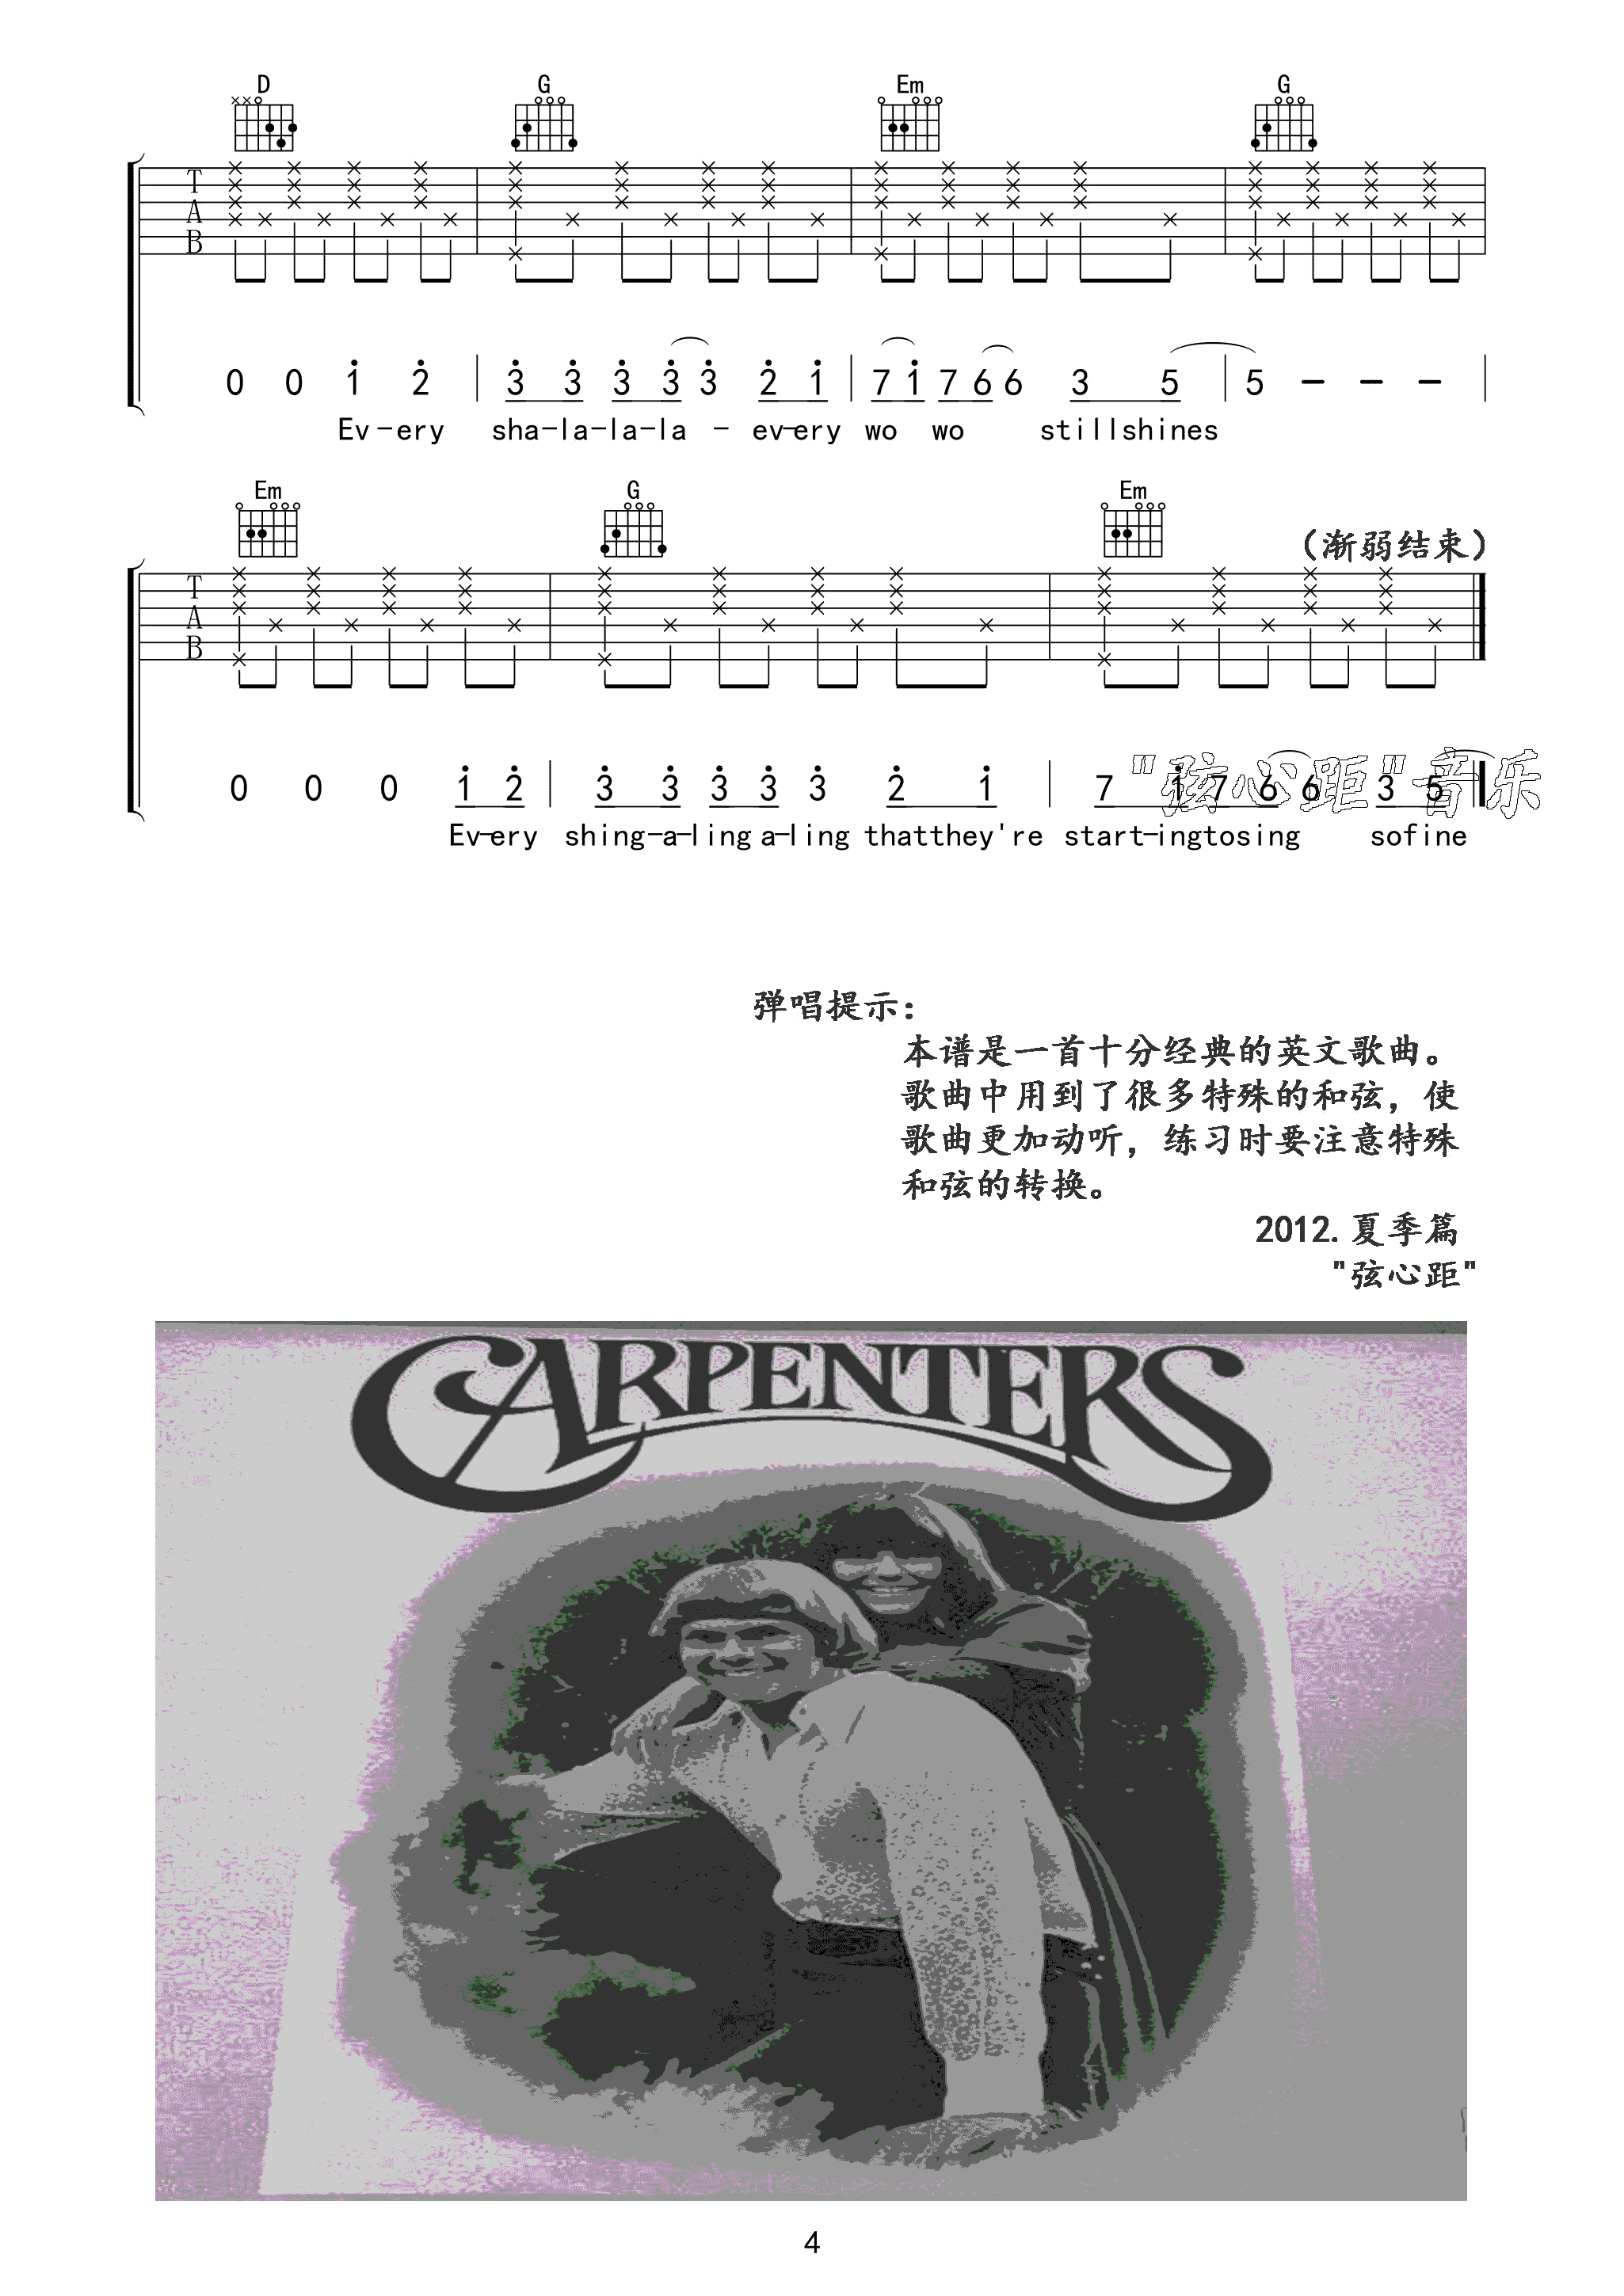 Carpenters Yesterday Once More昨日重现